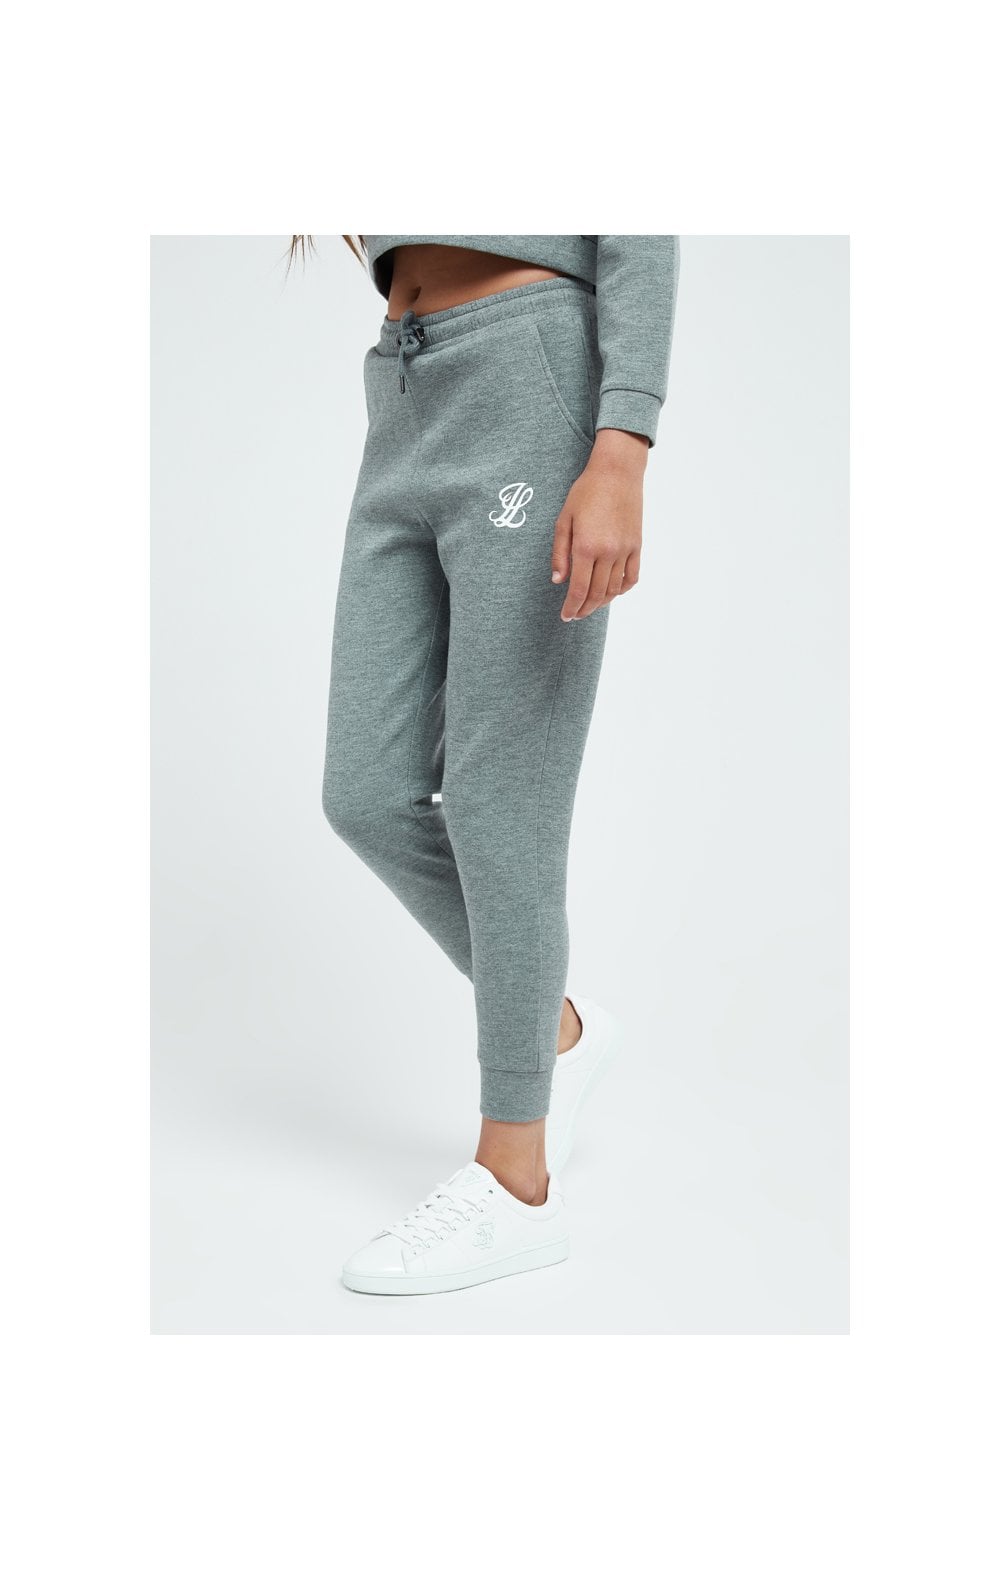 Load image into Gallery viewer, Illusive London Dual Track Pant - Grey Marl